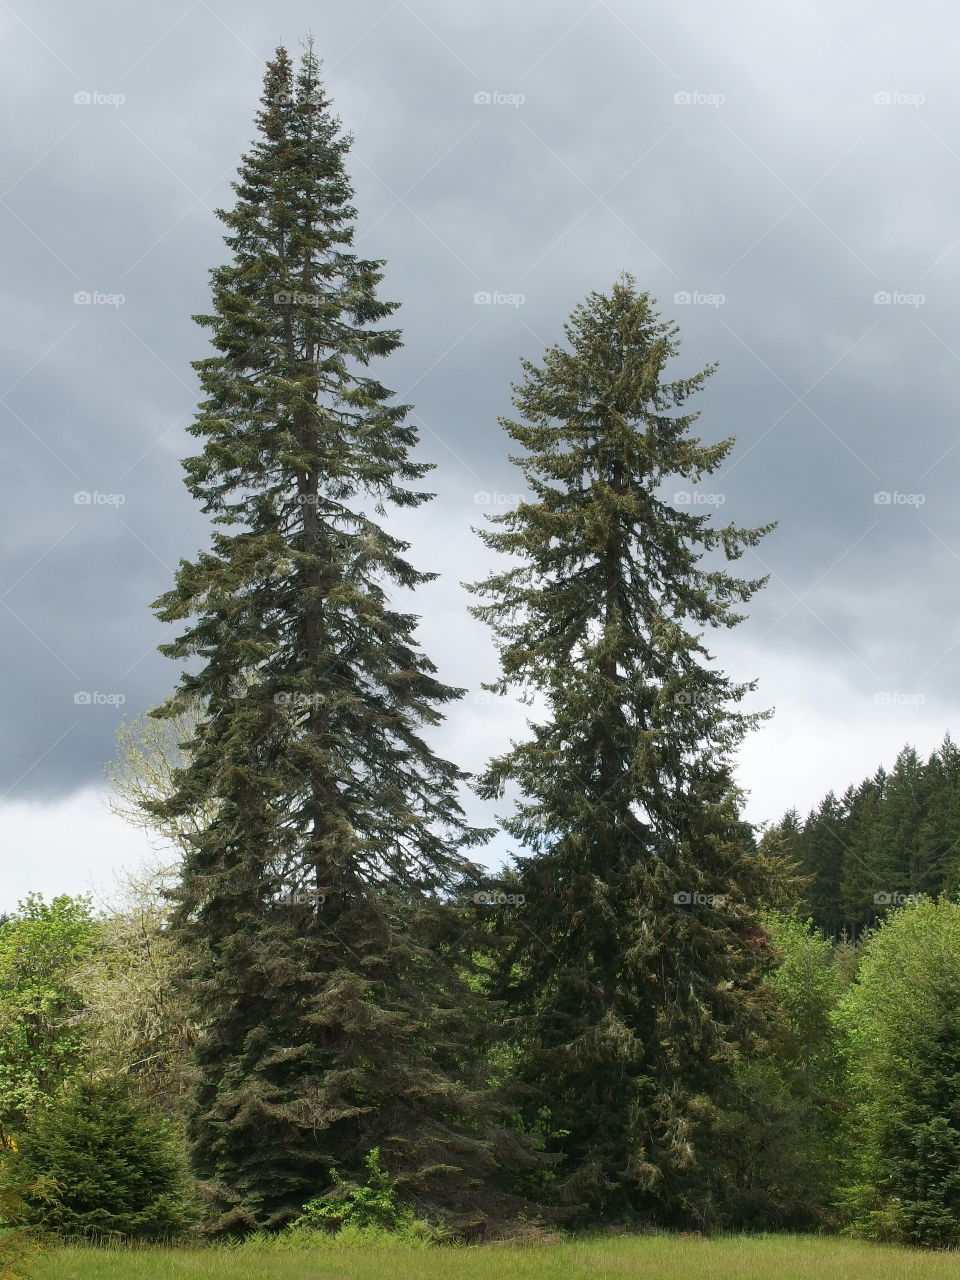 Two fir trees tower above all of the other trees in a field in rural Lane County Oregon on a rainy spring day.